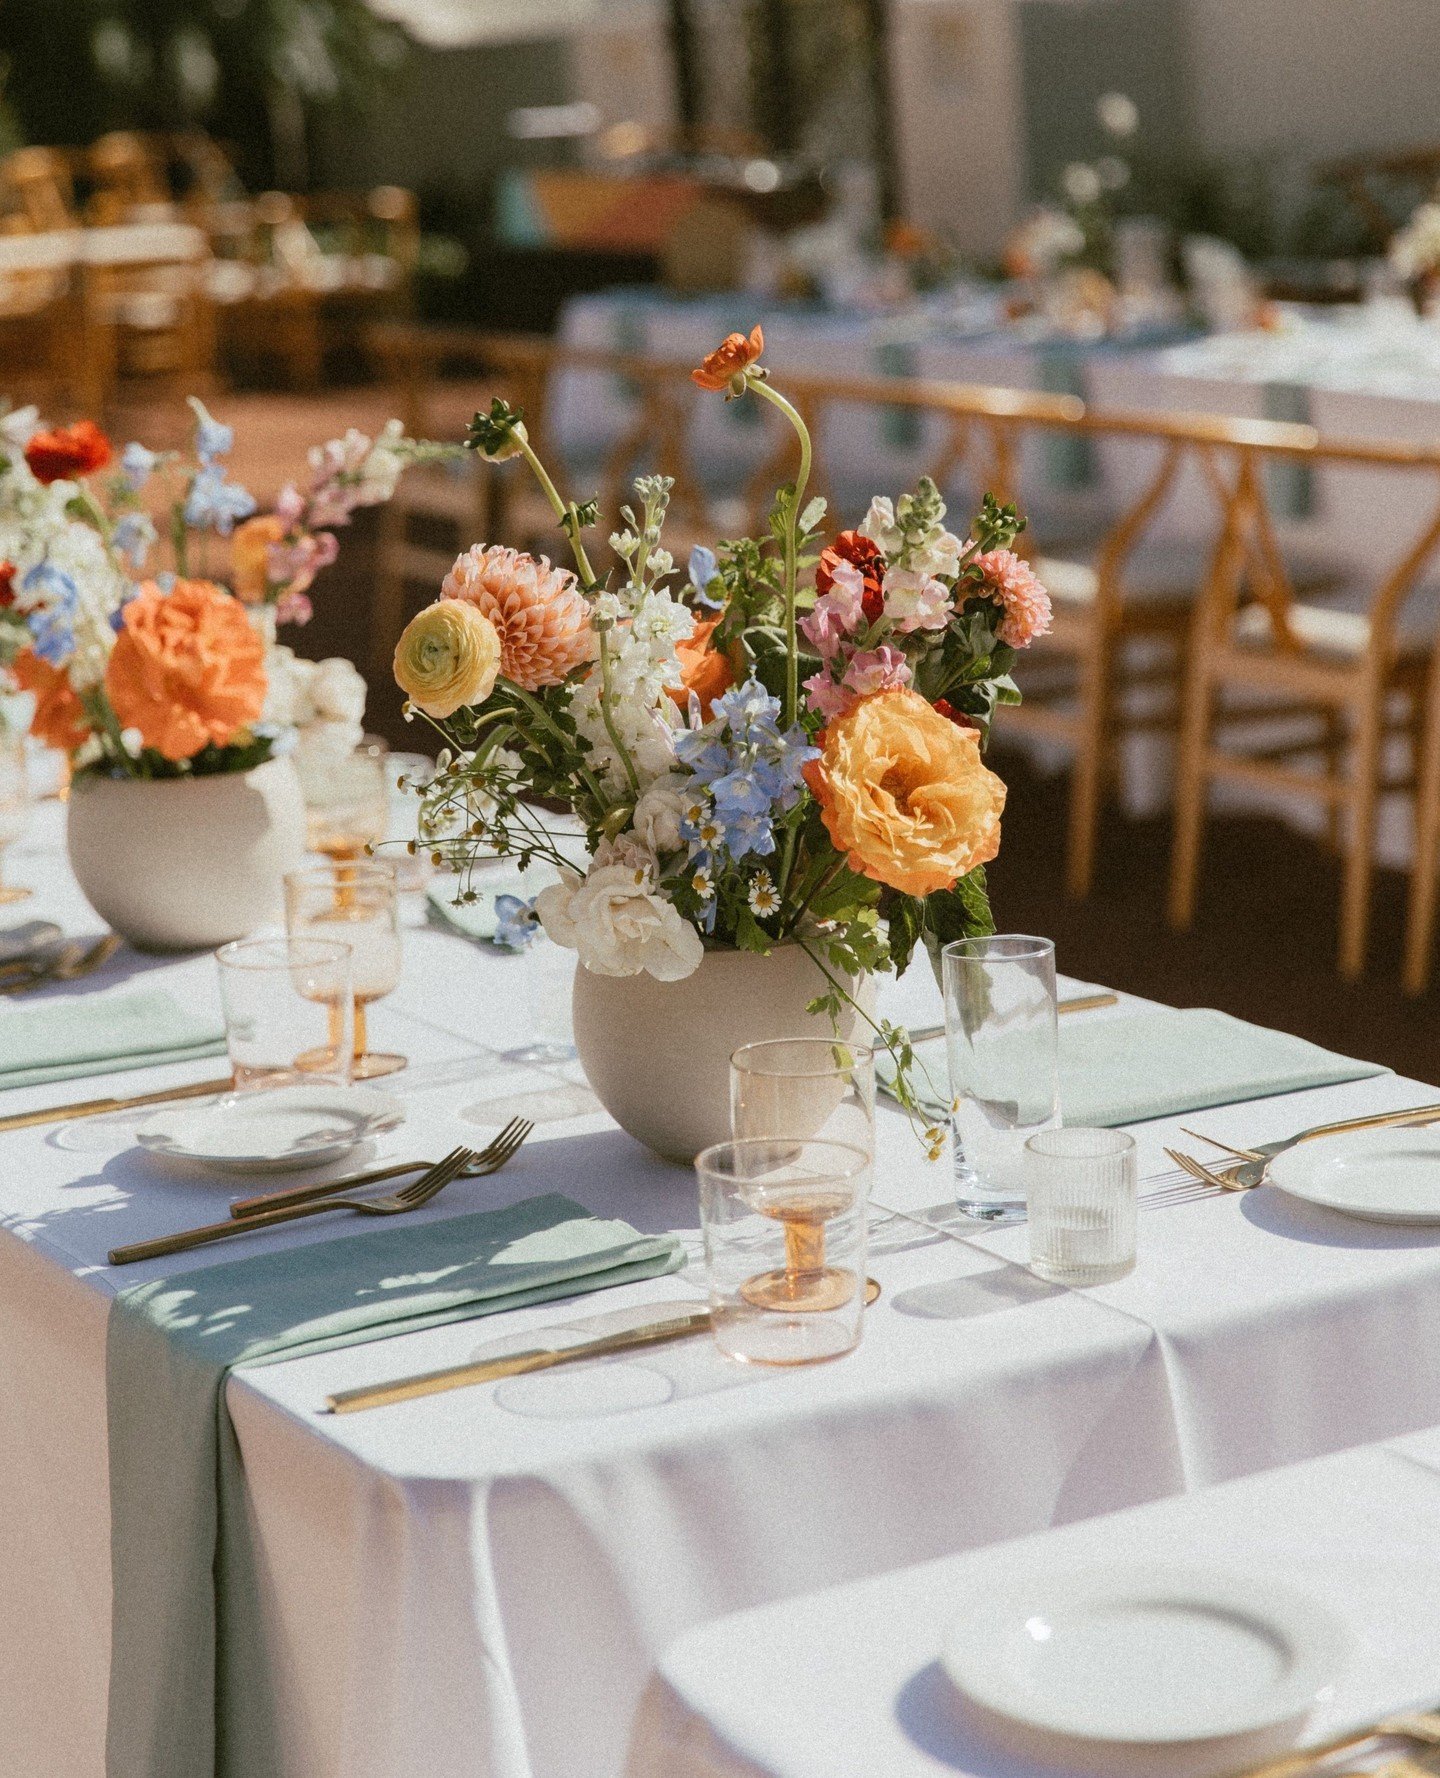 Living for all of the colorful, floral filled weddings we've been a part of these last few months 💐✨️⁠
⁠
⁠
Vendors⁠
Venue: @darlington_house⁠
Catering: @coastcatering⁠
Photography: @dehaanphoto⁠
Planner: @alwaysflawlessproductions⁠
Makeup: @taylorhe